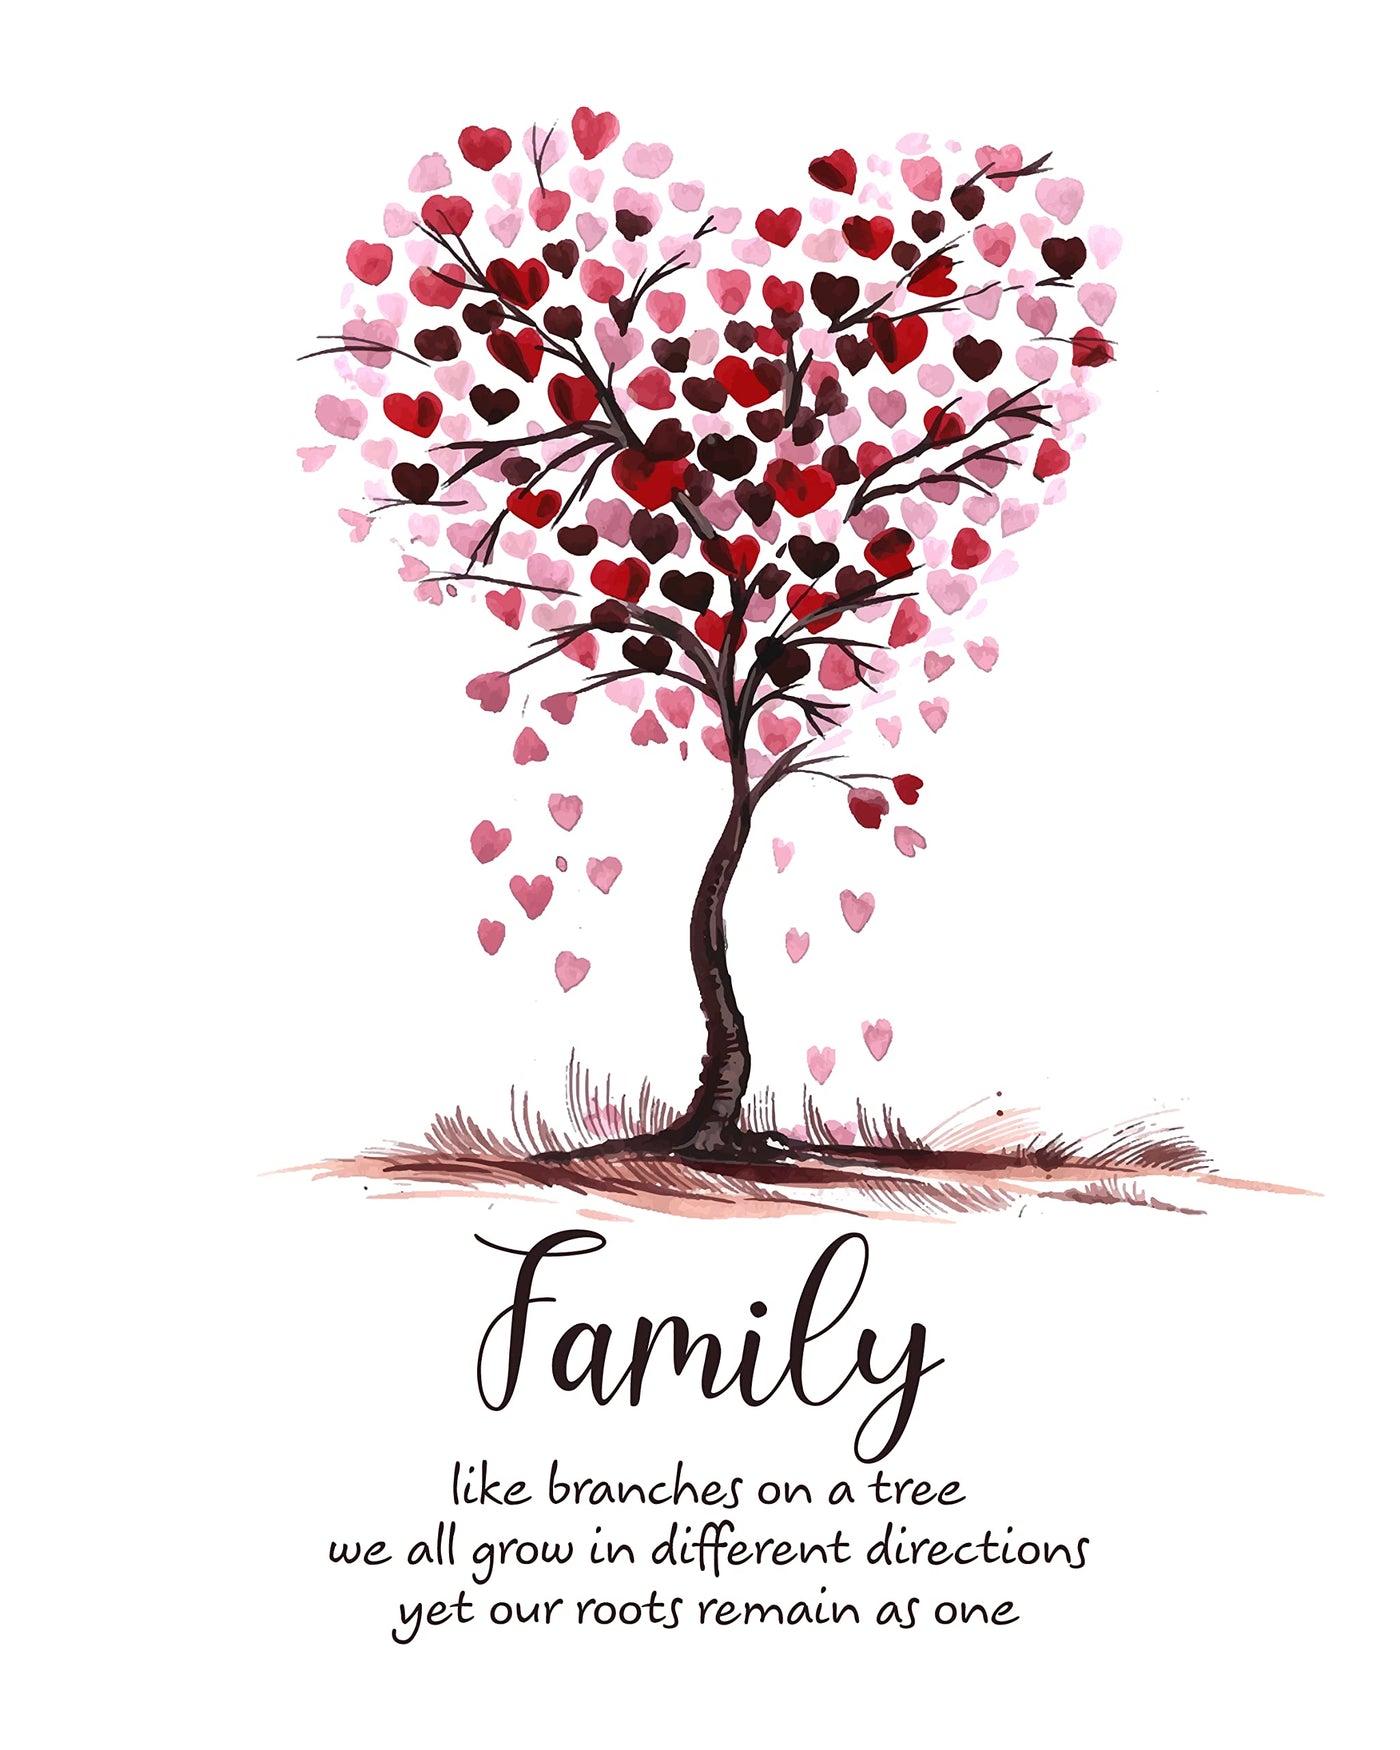 "Family -Our Roots Remain As One" Tree of Hearts Wall Art Sign -8 x 10" Inspirational Poster Print -Ready to Frame. Home-Welcome-Cabin-Lake-Living Room Decor. Great Housewarming Gift!